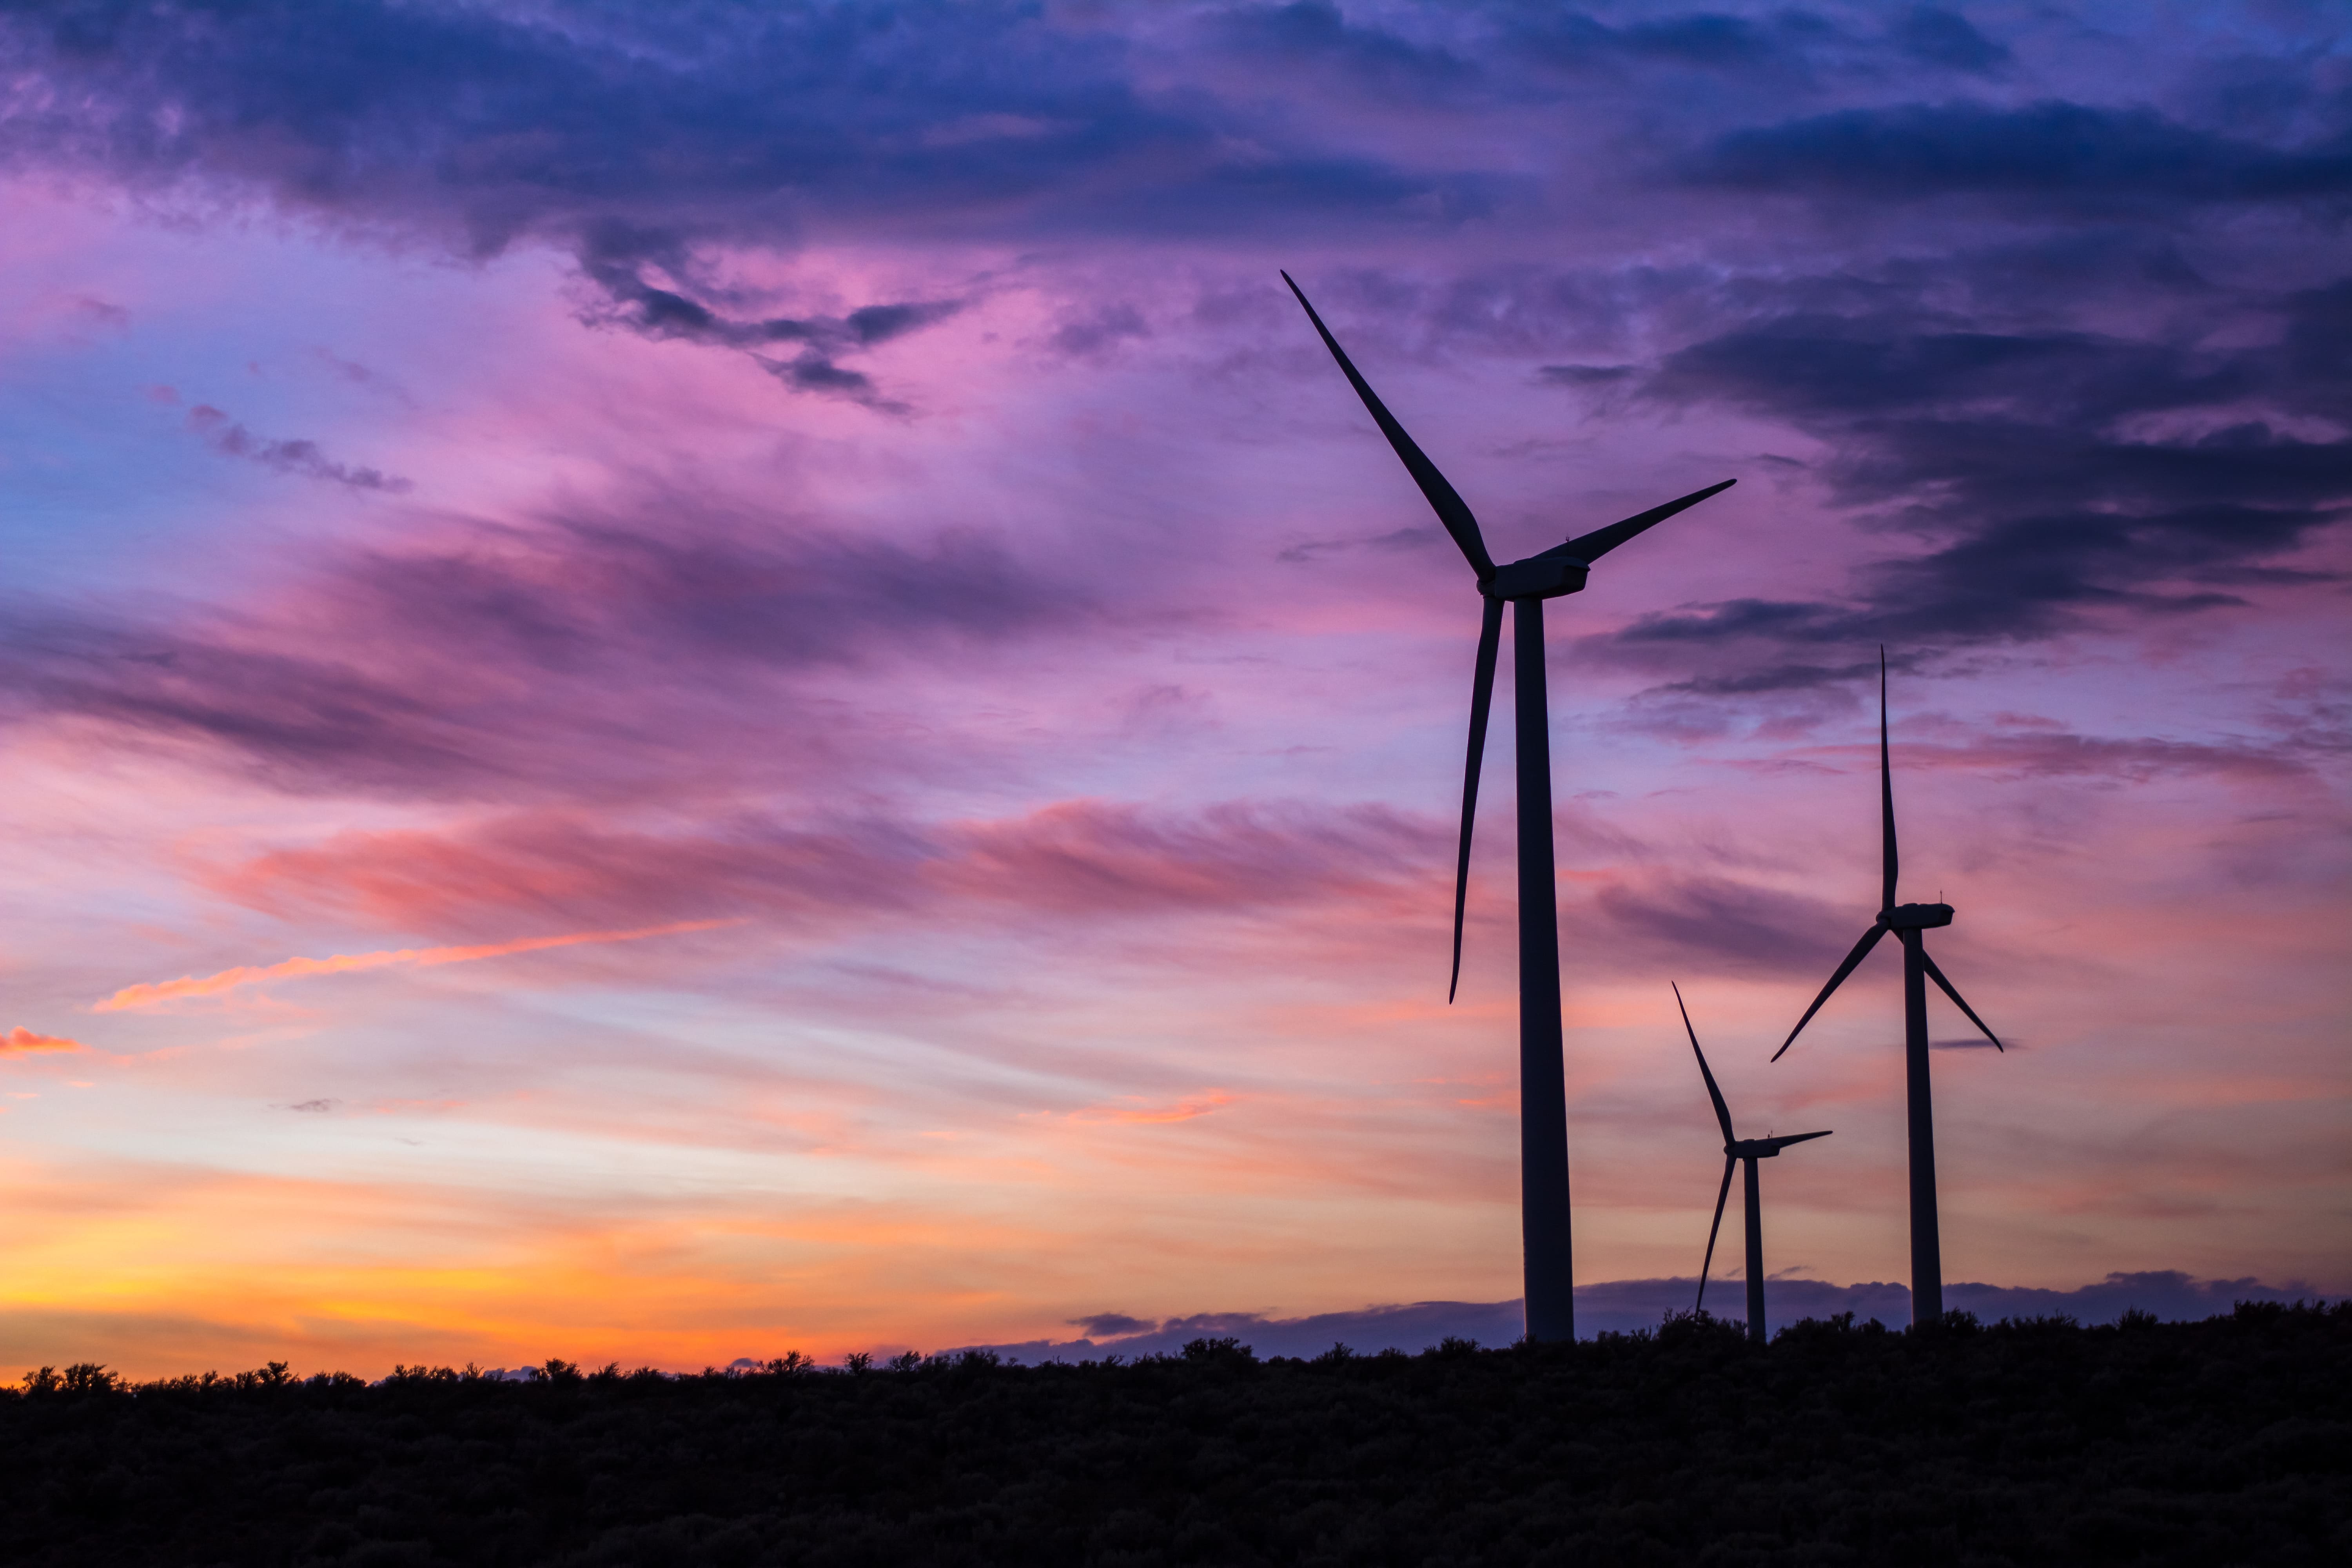 wind turbines in silhouette against a sunset